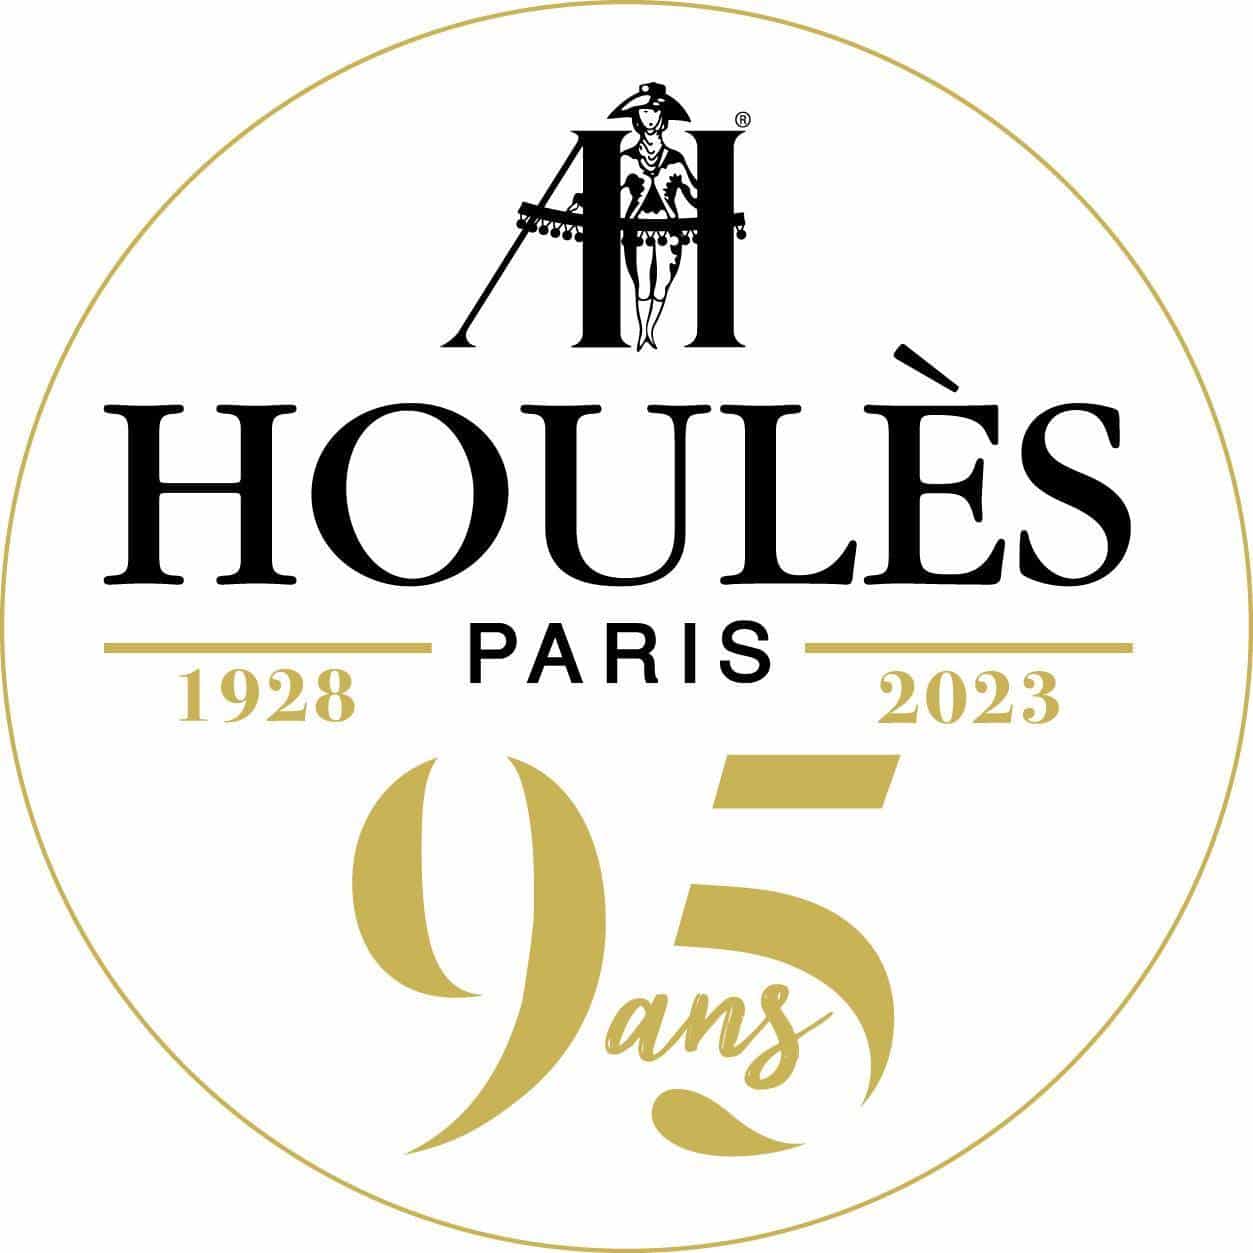 houles